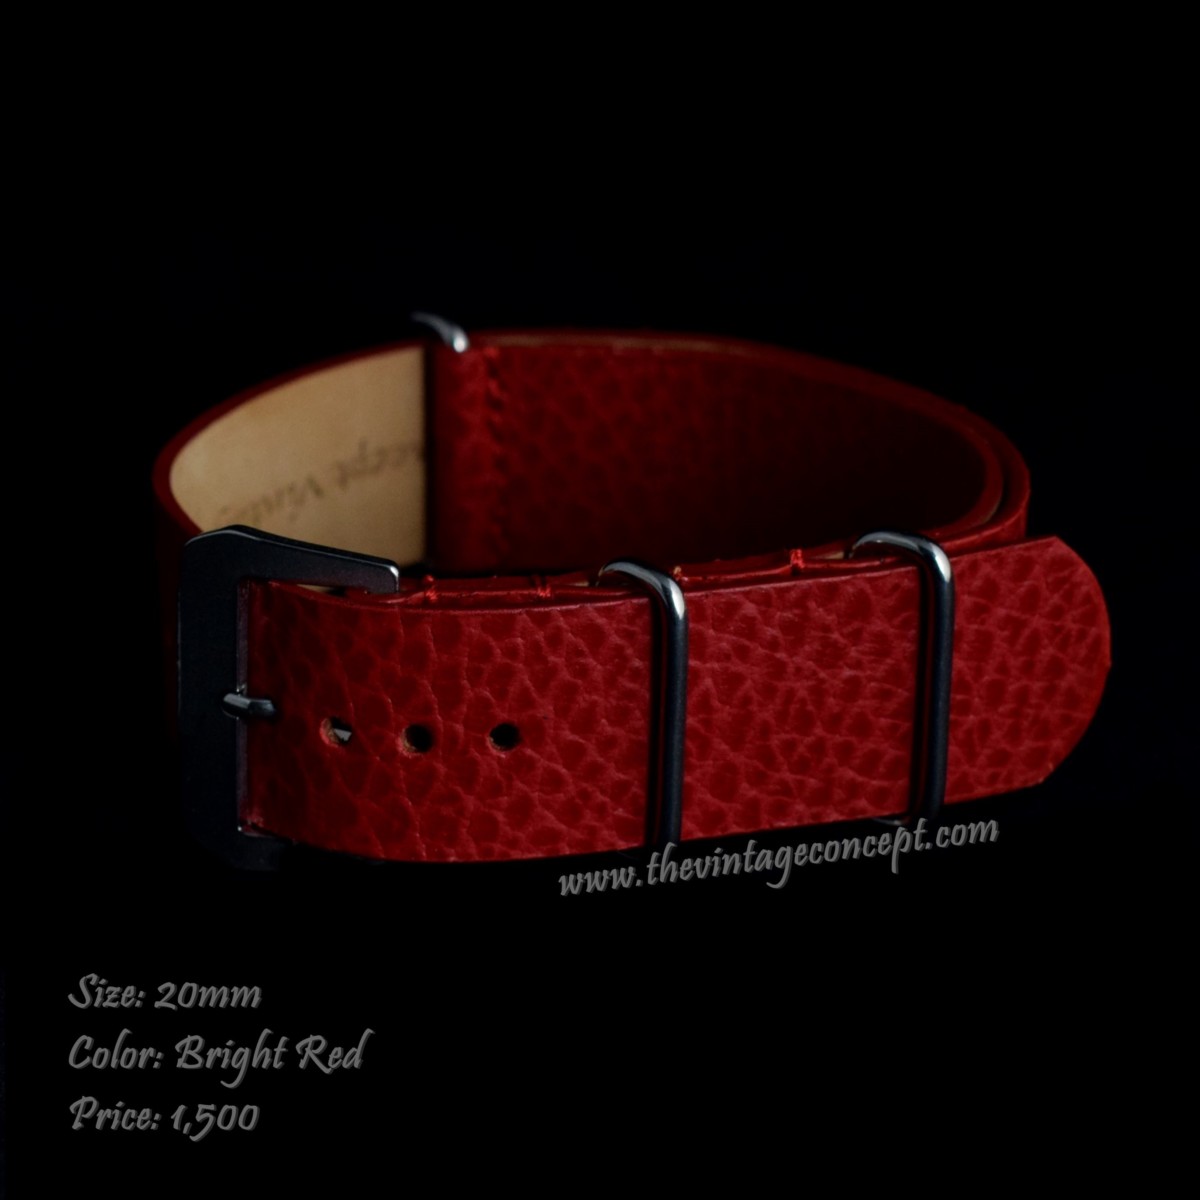 20mm Bright Red Nato-Style Leather Strap - The Vintage Concept